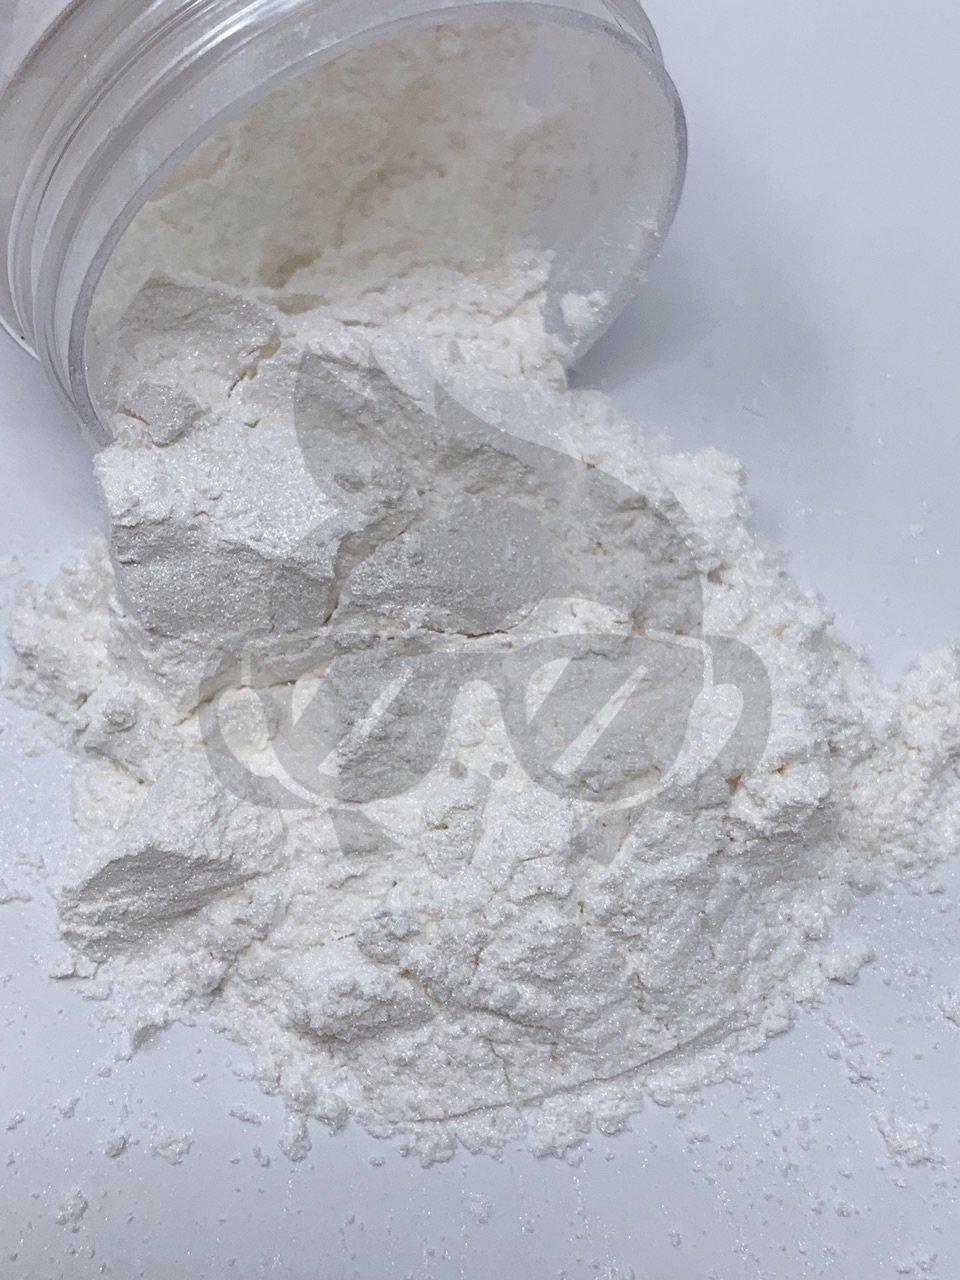 Ultra Sparkling White Mica Powder – Slice of the Moon